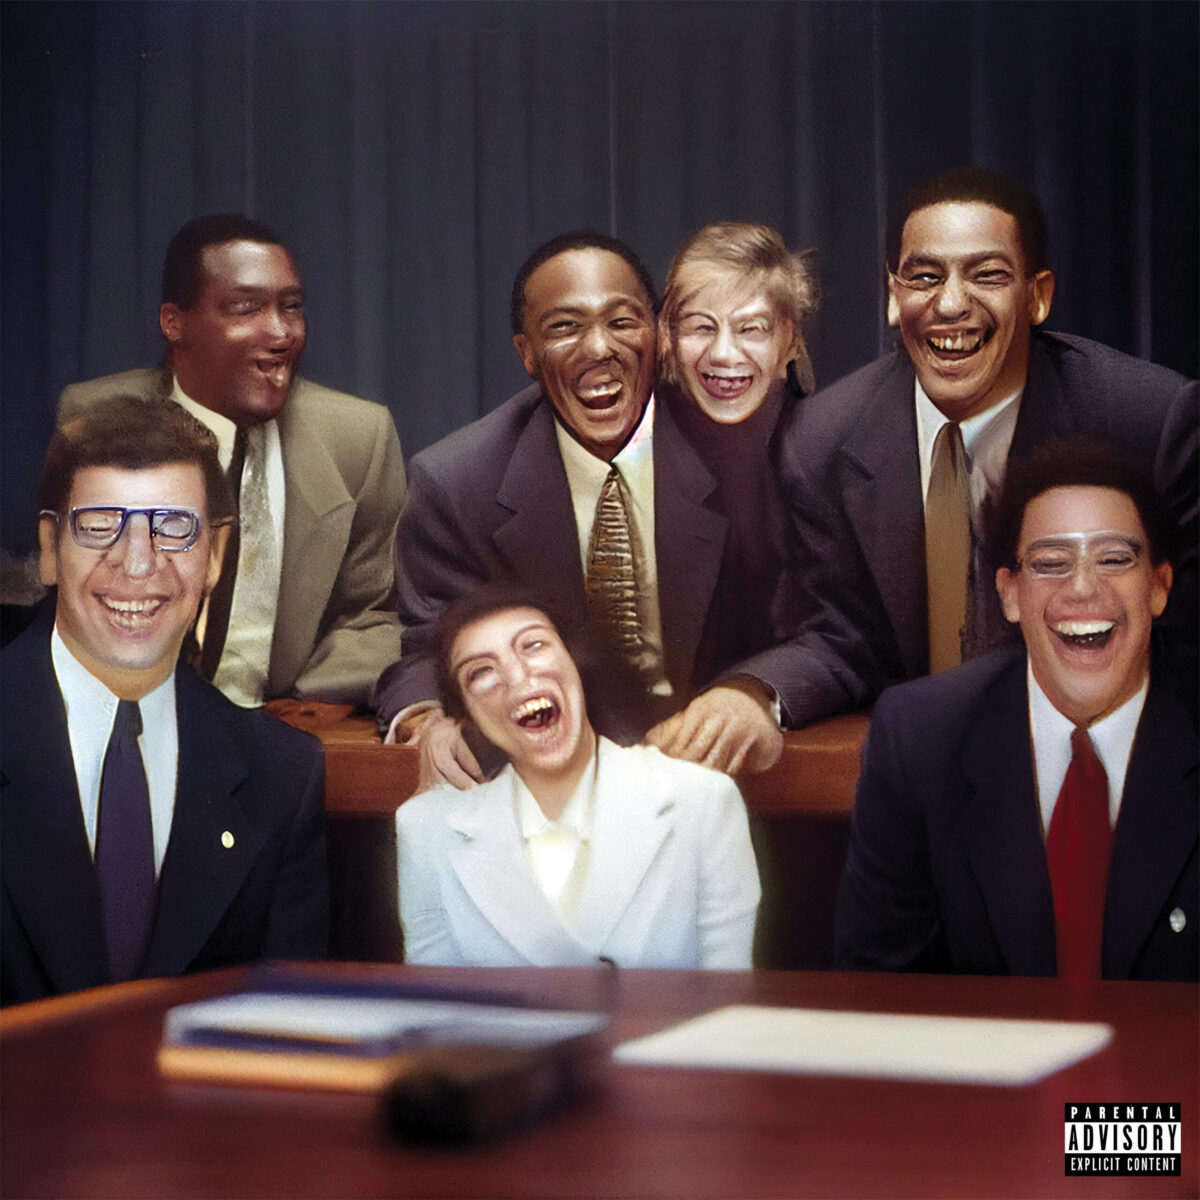 Album art for Let's Start Here by Lil Yachty. AI generated people at a table. Their faces are distorted.